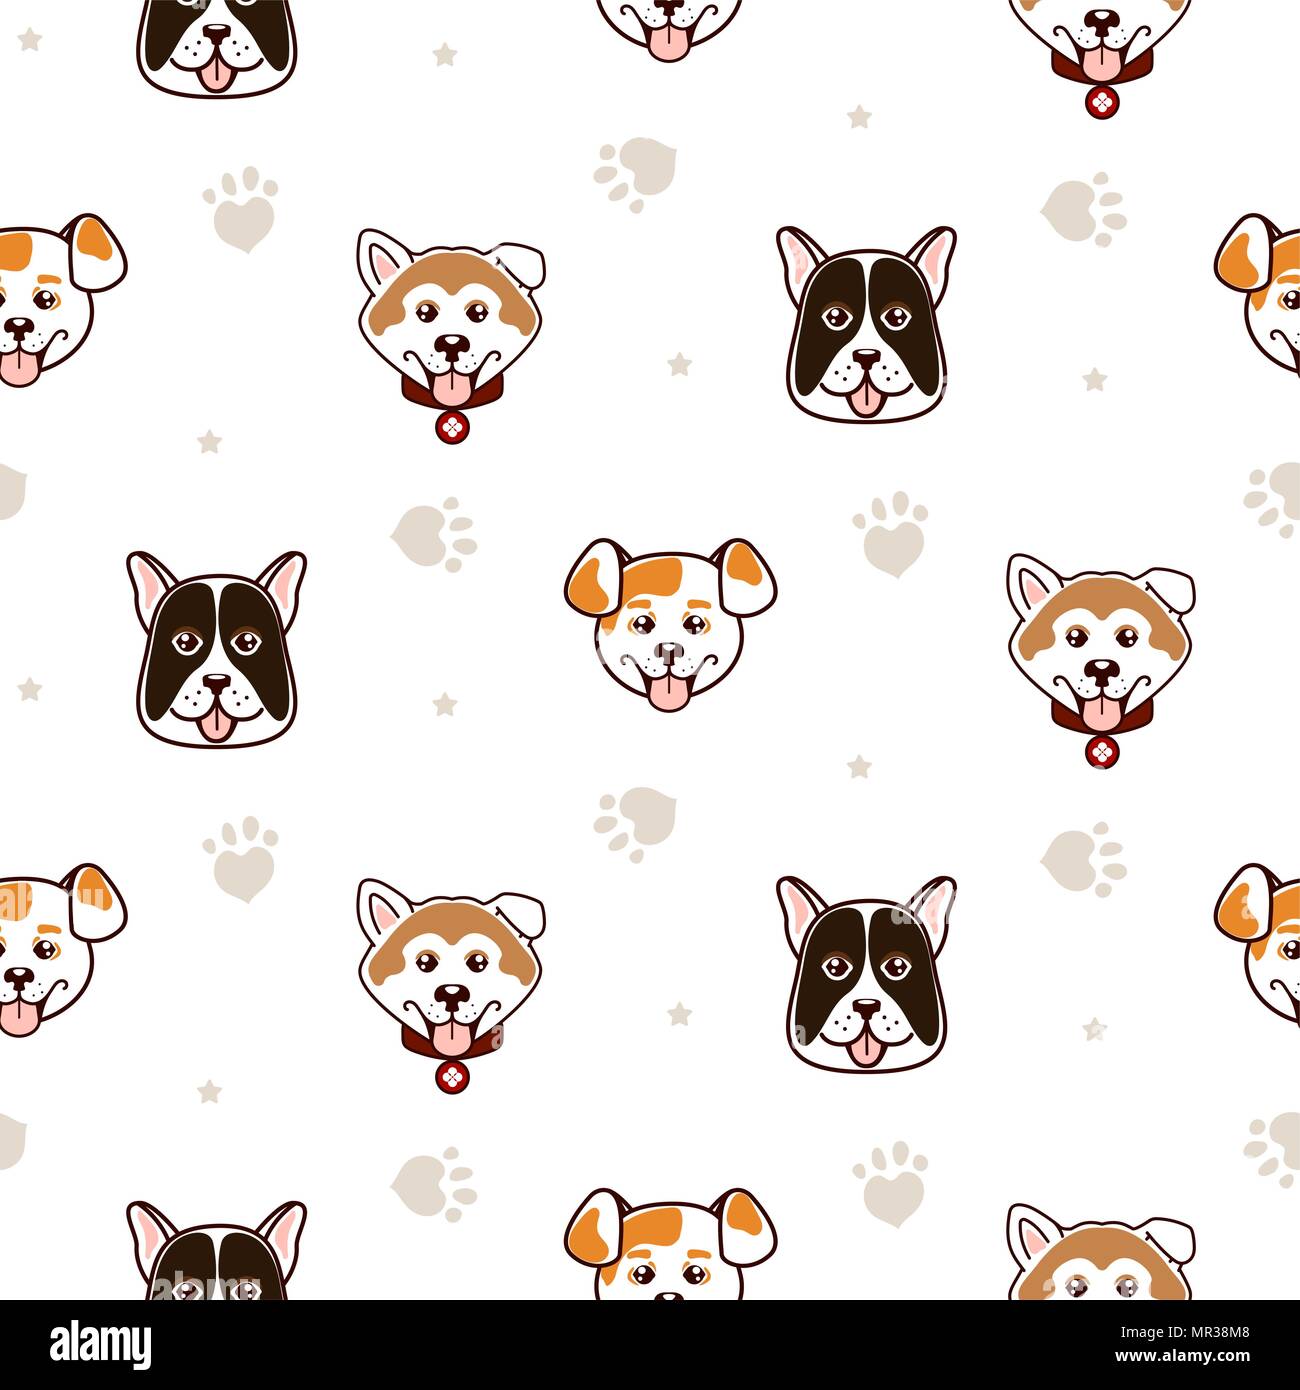 Cute dogs animal seamless vector pattern. Stock Vector